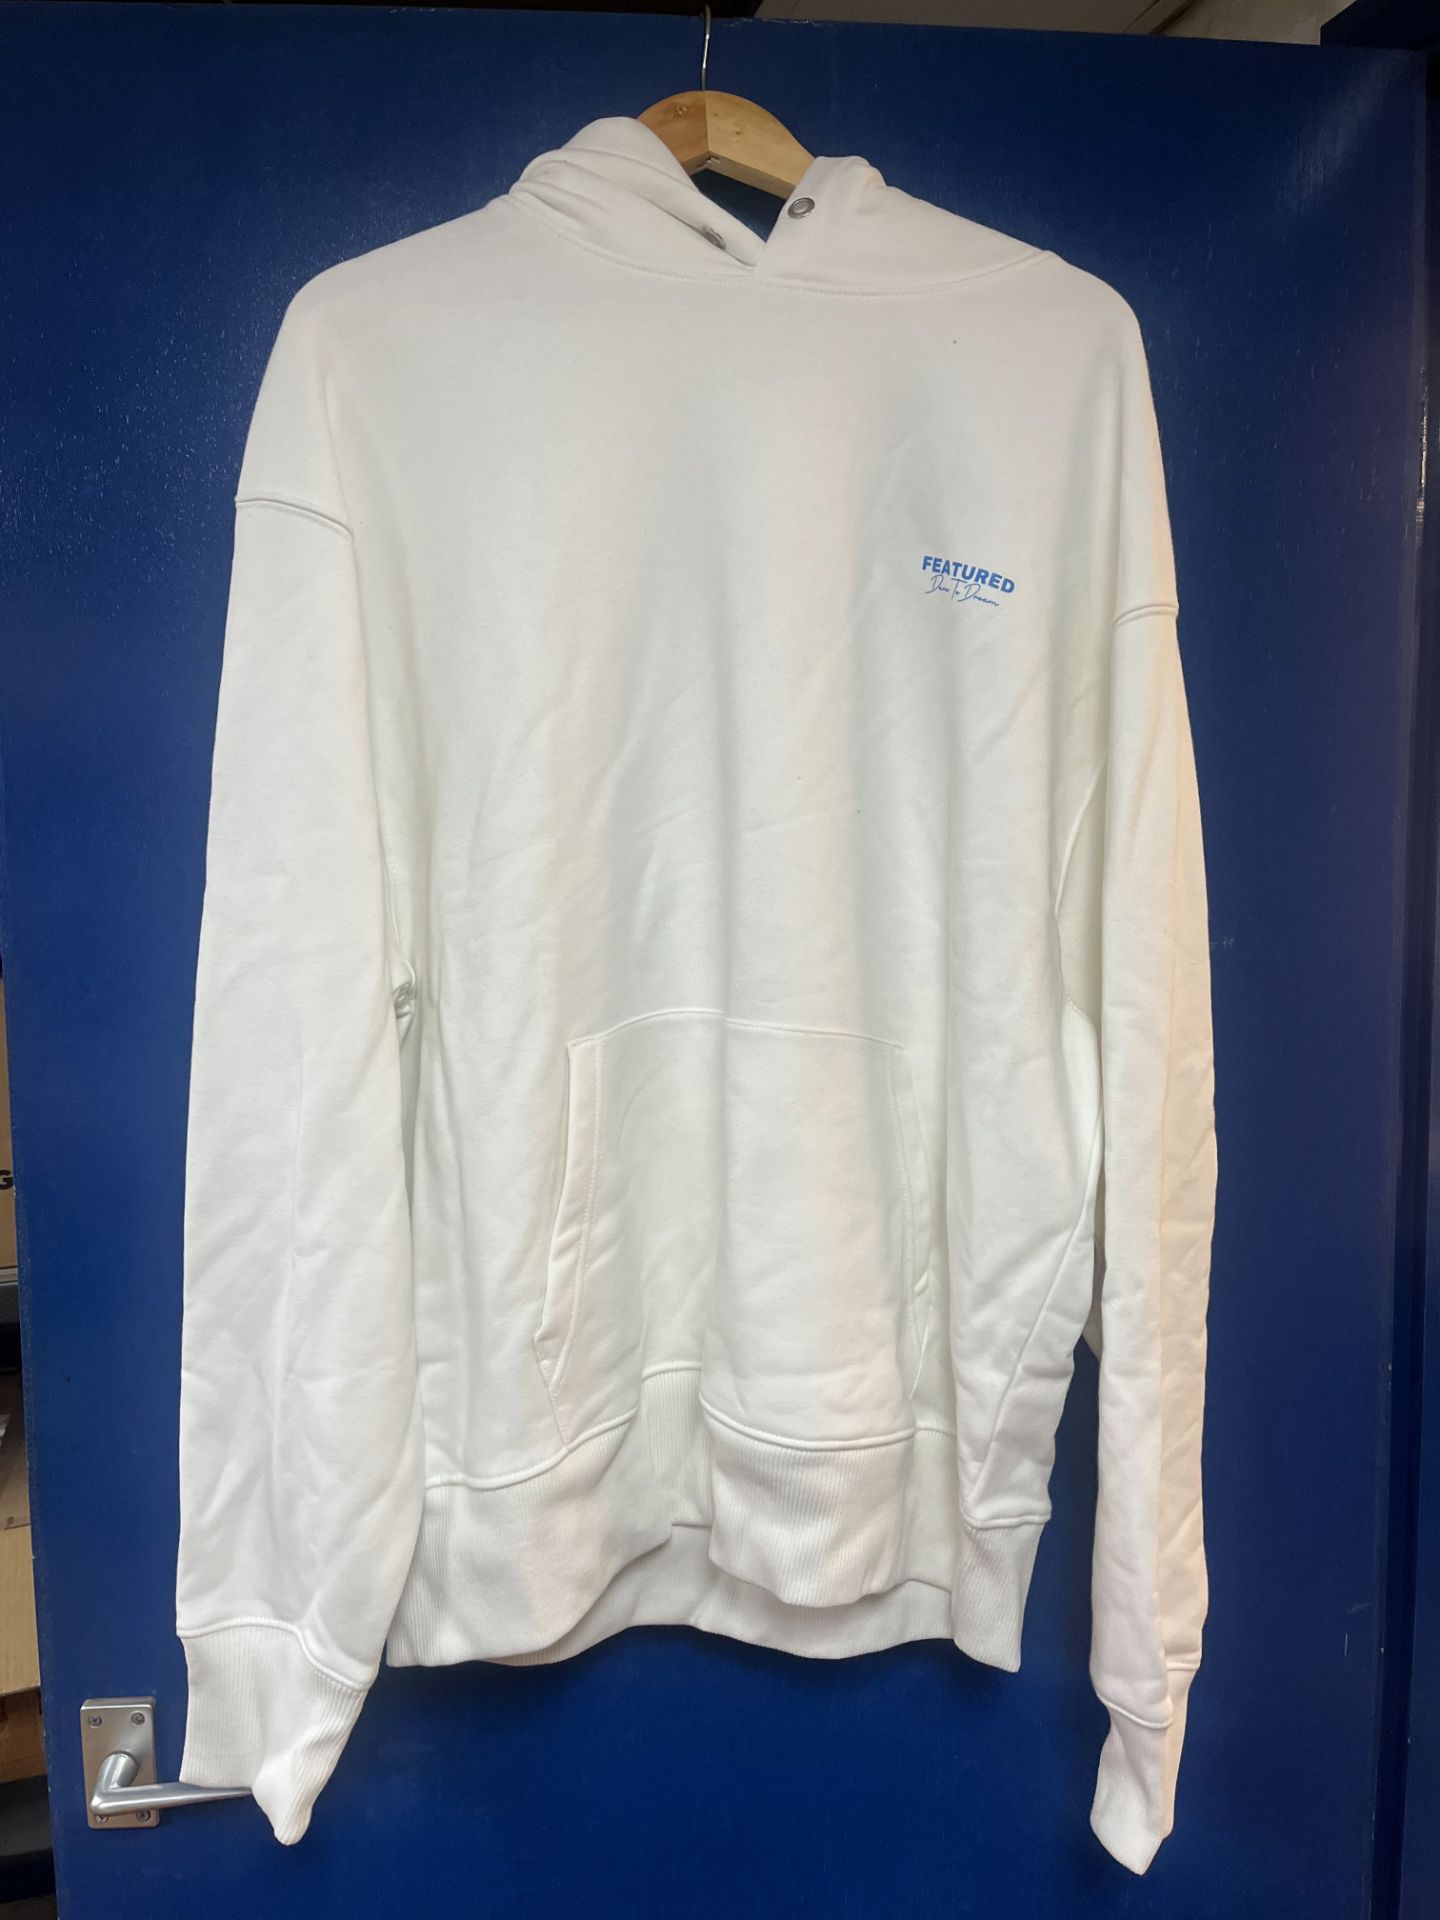 BRAND NEW FEATURED Dare To Dream Boxy Fit Hoodie - Blue/White. SIZE XL. RRP £68. (SR)